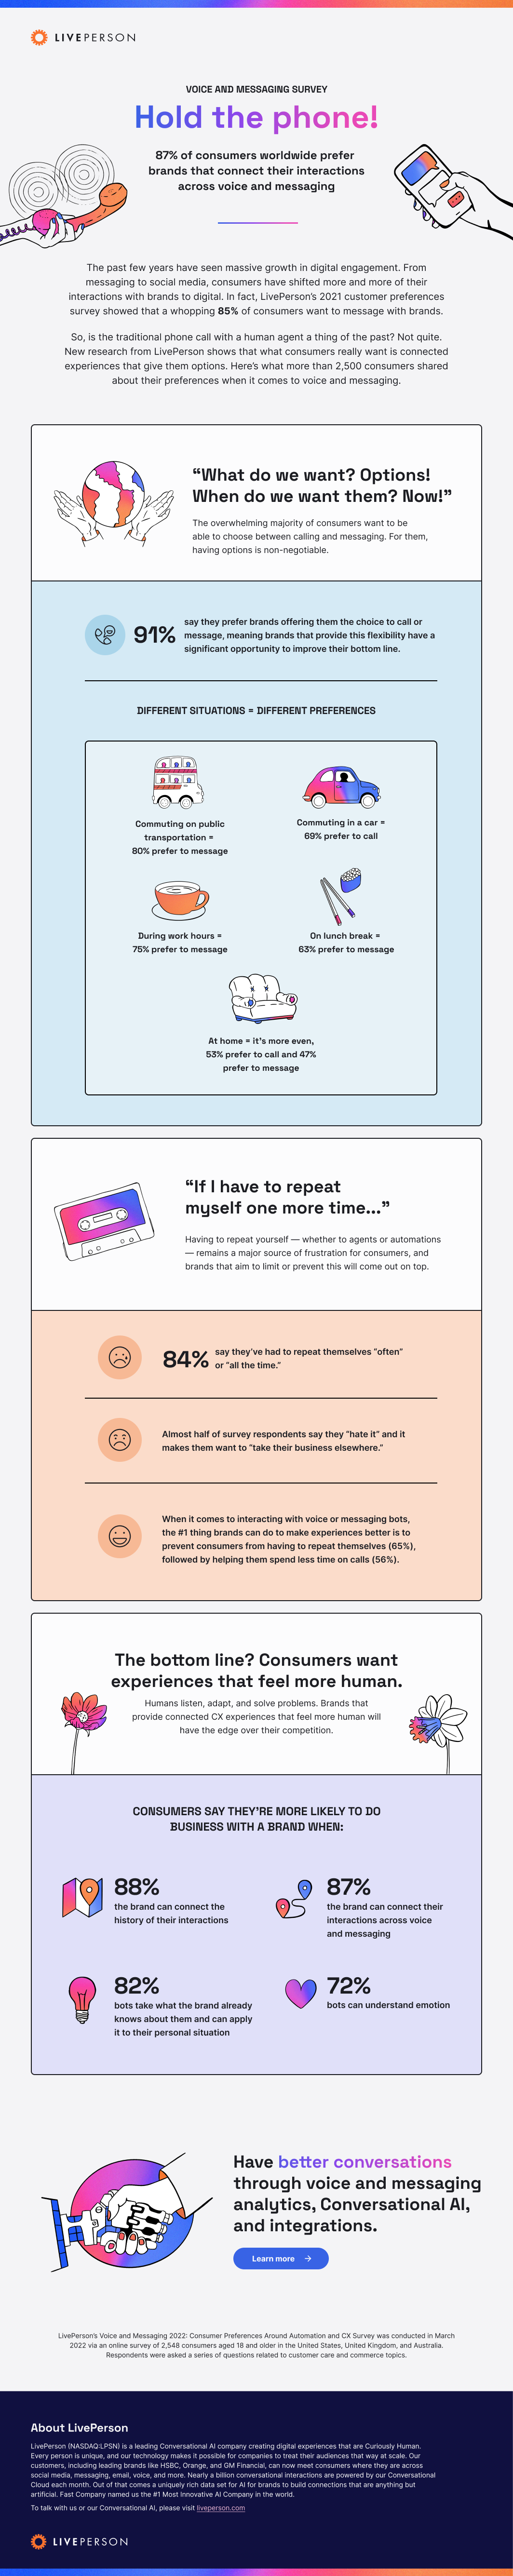 infographic displaying stats about connected customer experiences from LivePerson's survey